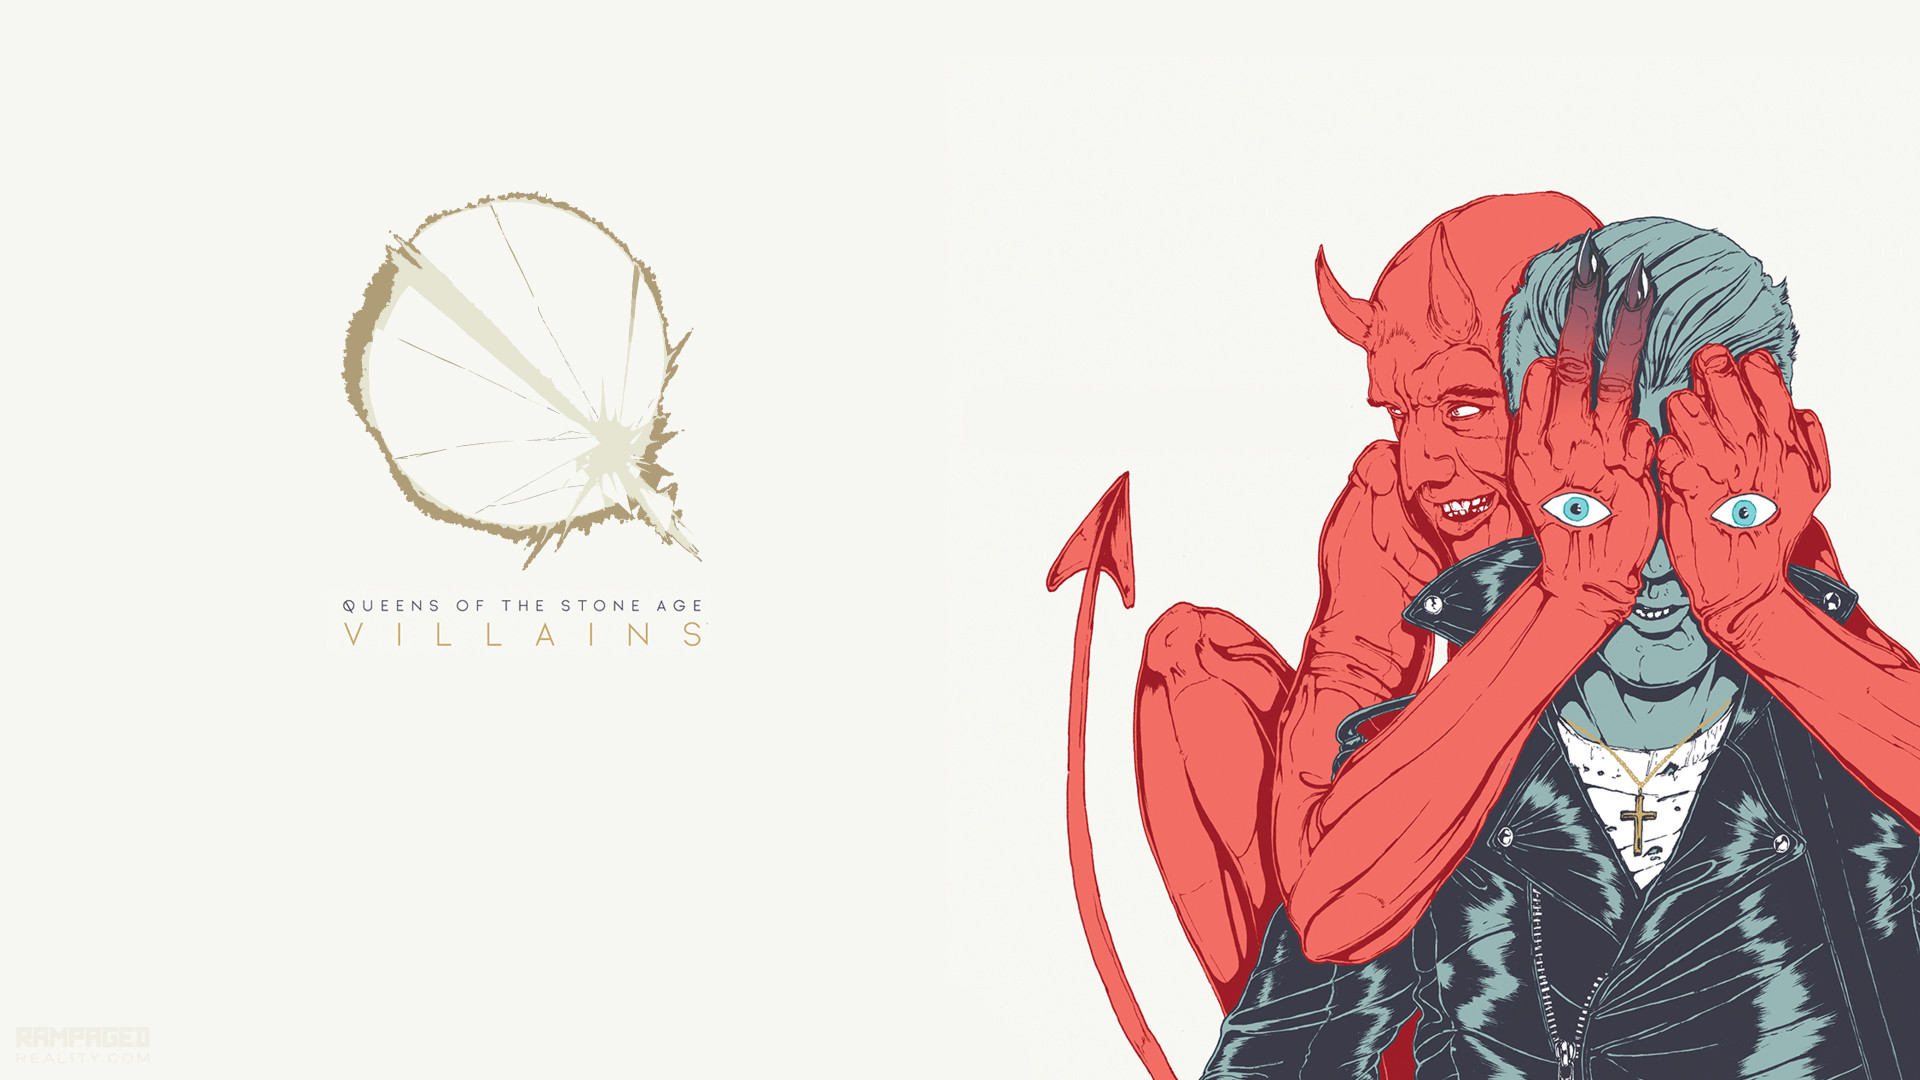 1920x1080 Queens of the Stone Age - Villains Wallpapers 